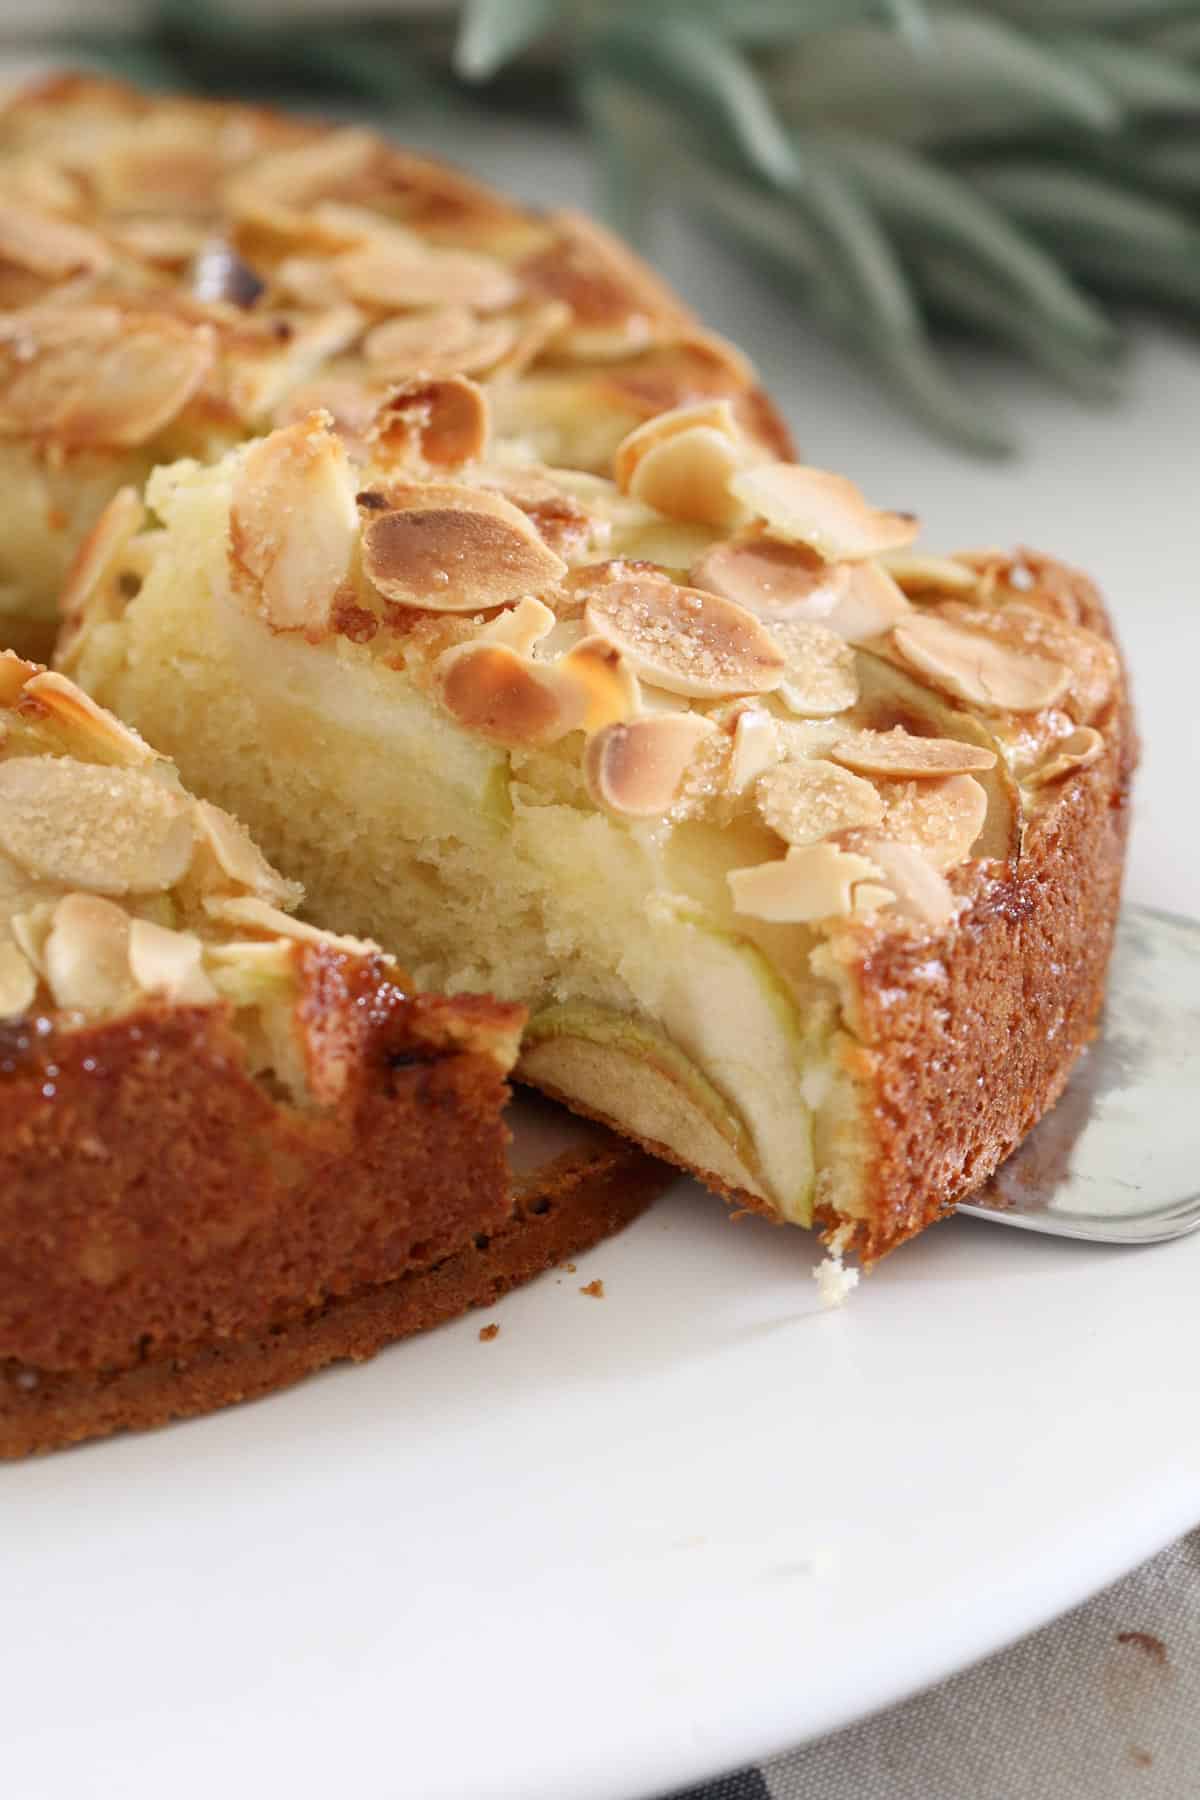 A piece of apple cake with almonds on top being removed from the entire cake.